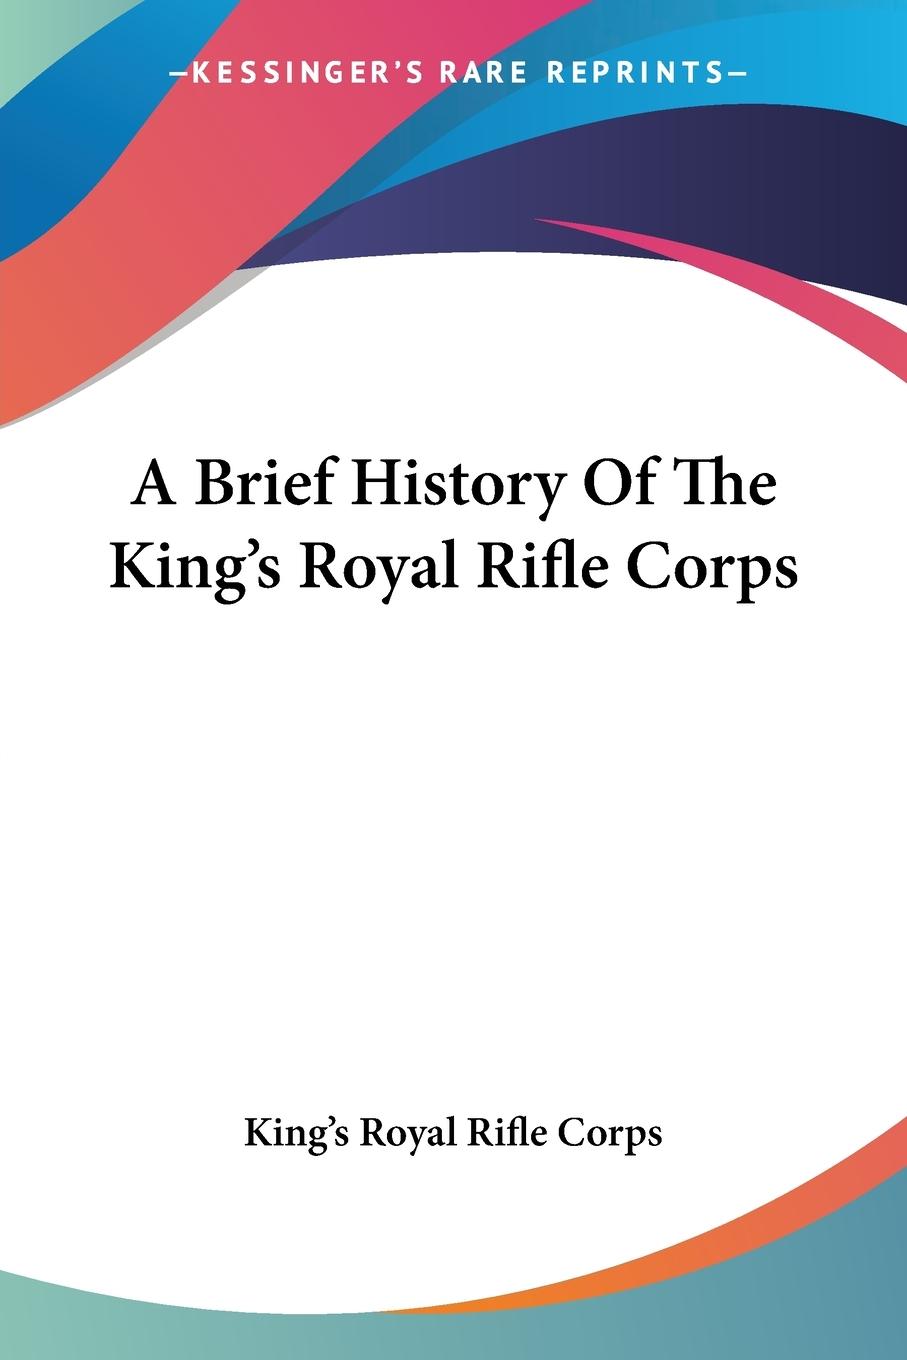 A Brief History Of The King s Royal Rifle Corps - King s Royal Rifle Corps